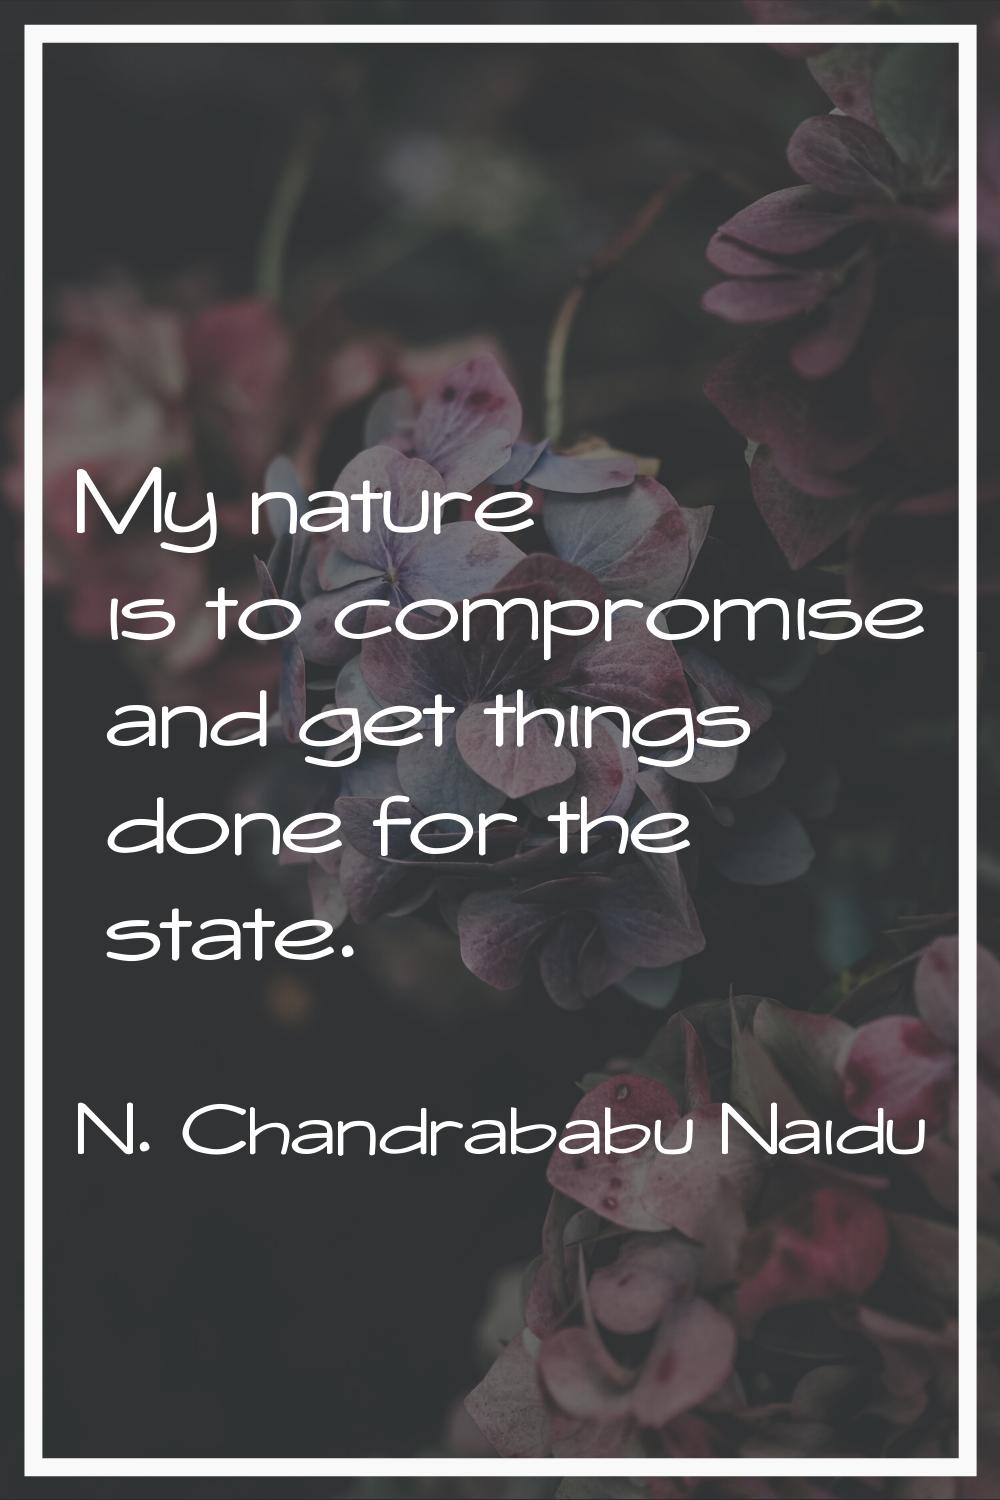 My nature is to compromise and get things done for the state.